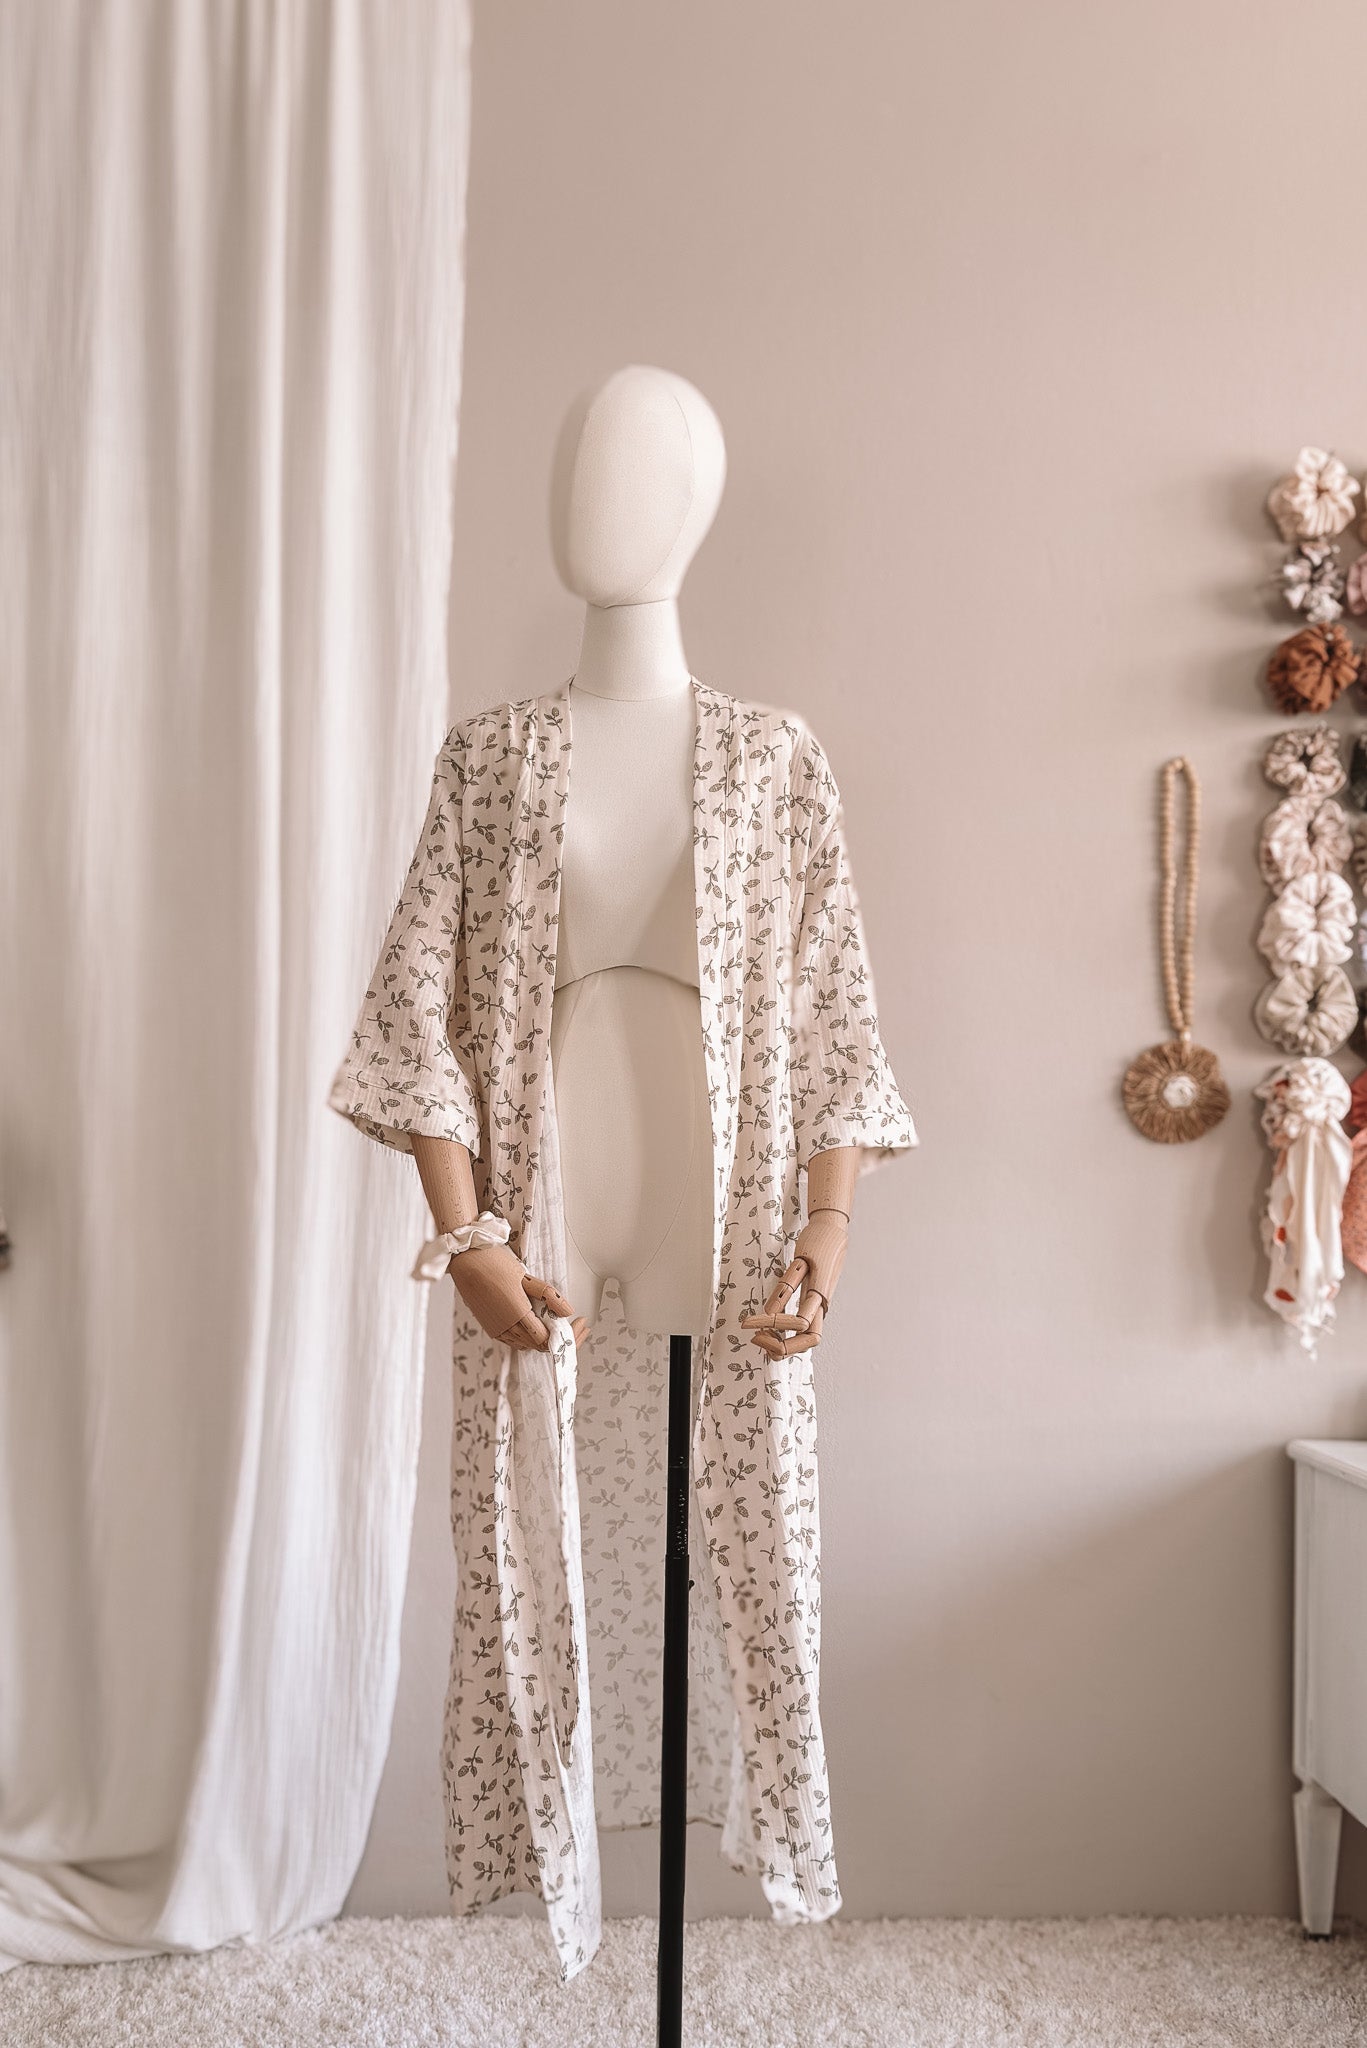 Load image into Gallery viewer, Muslin robe  / just floral
